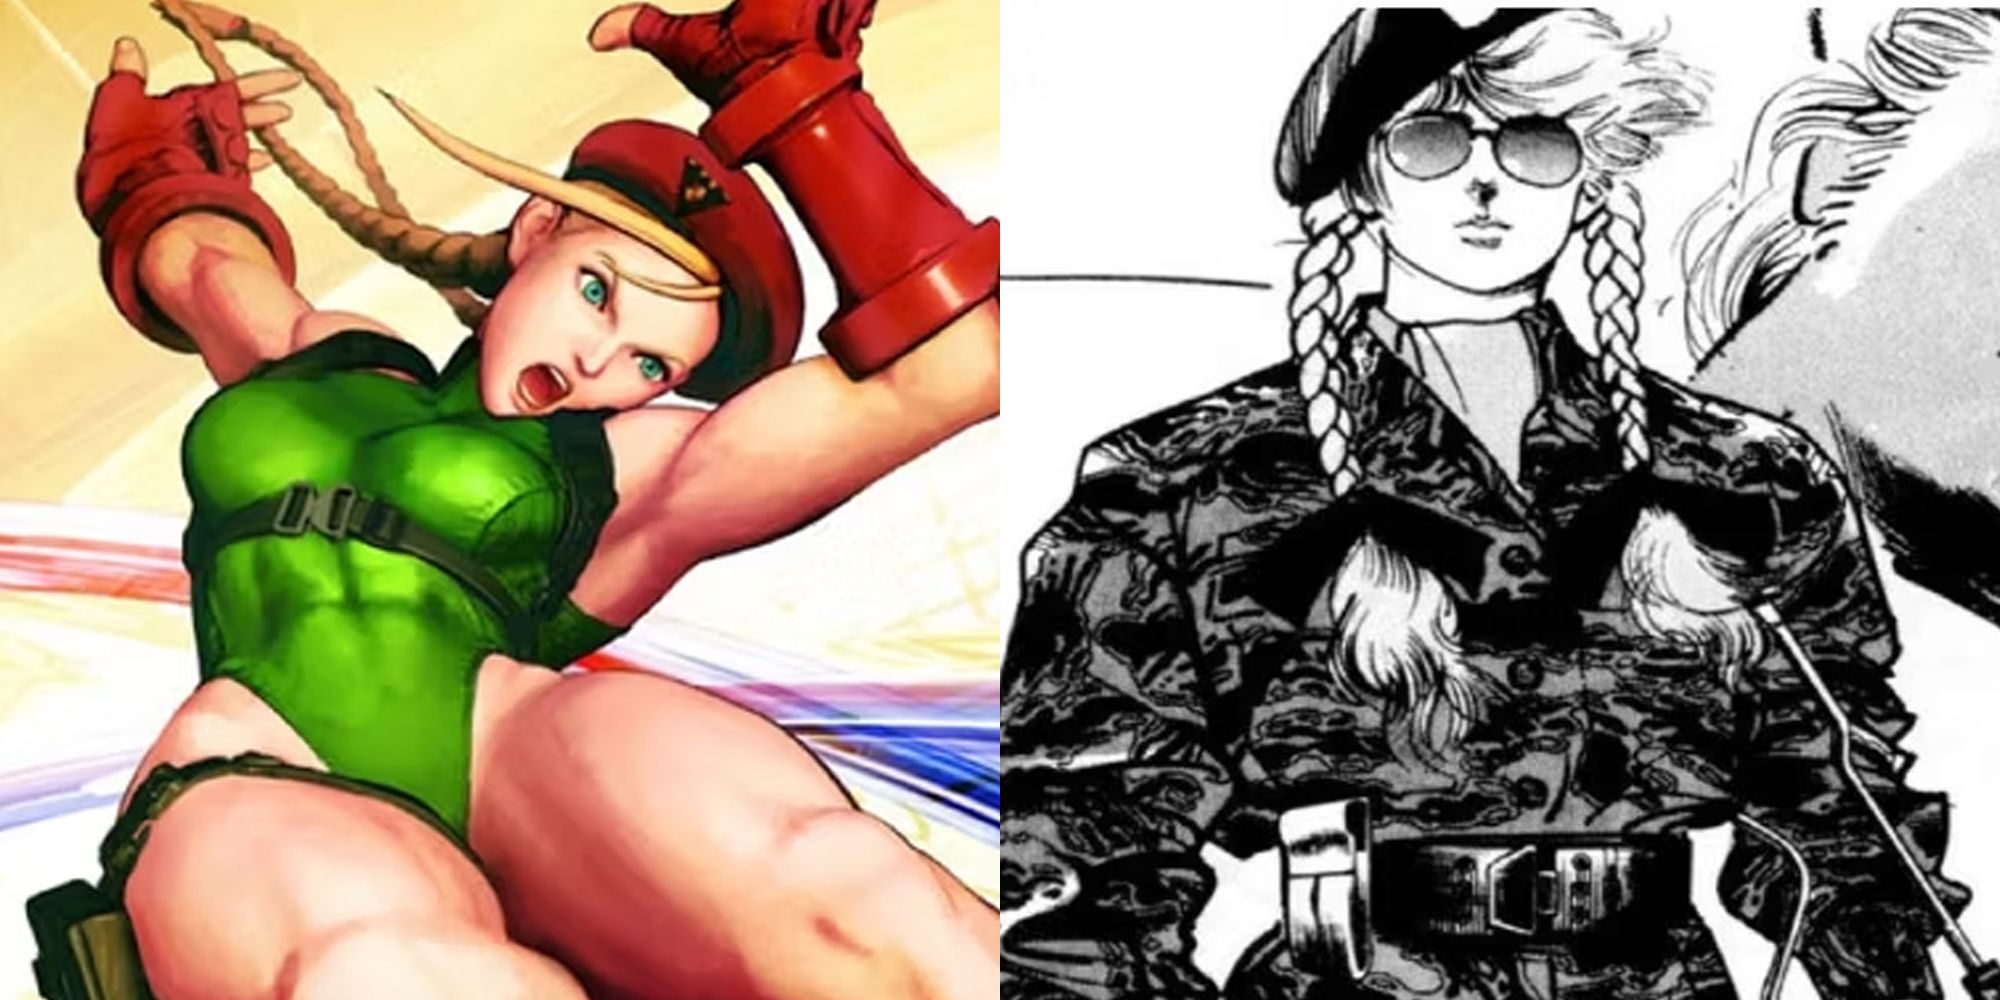 Cammy white from a popular fighting game